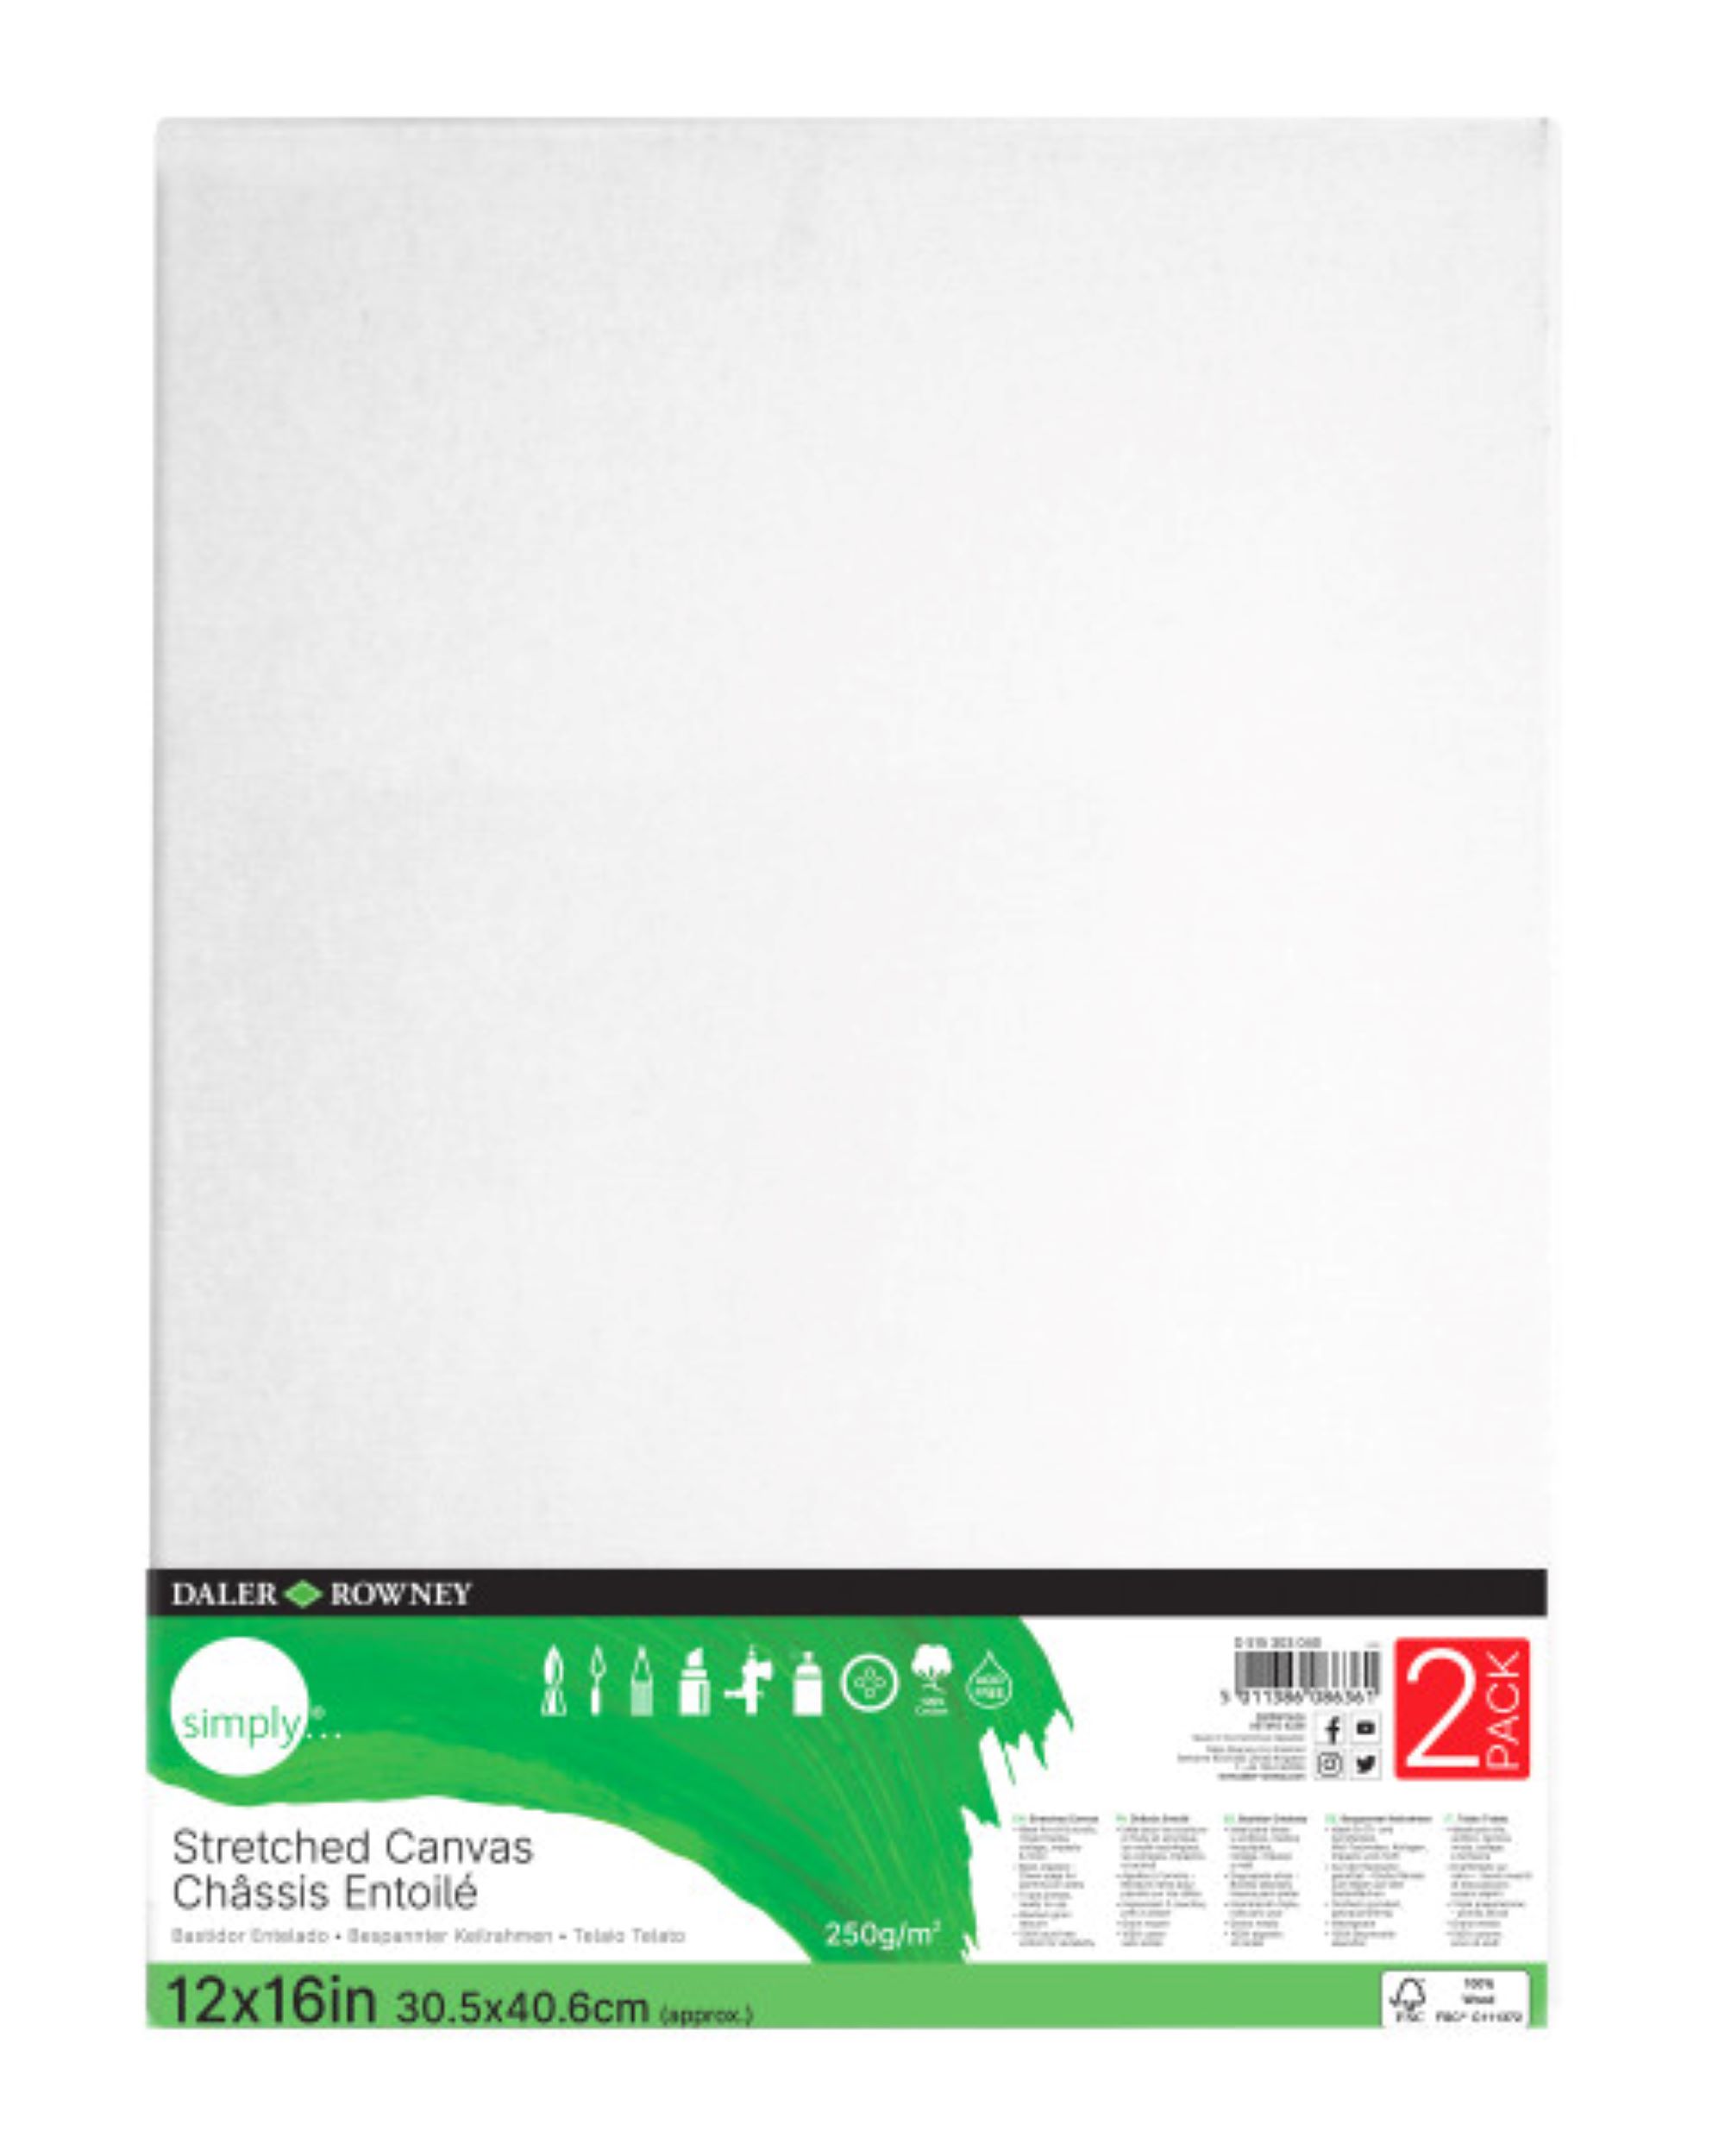 Daler-Rowney Simply Canvas, White Stretched, 12x16 inch, 2 Pieces - Students, Teens, Kids, Artists - image 1 of 6